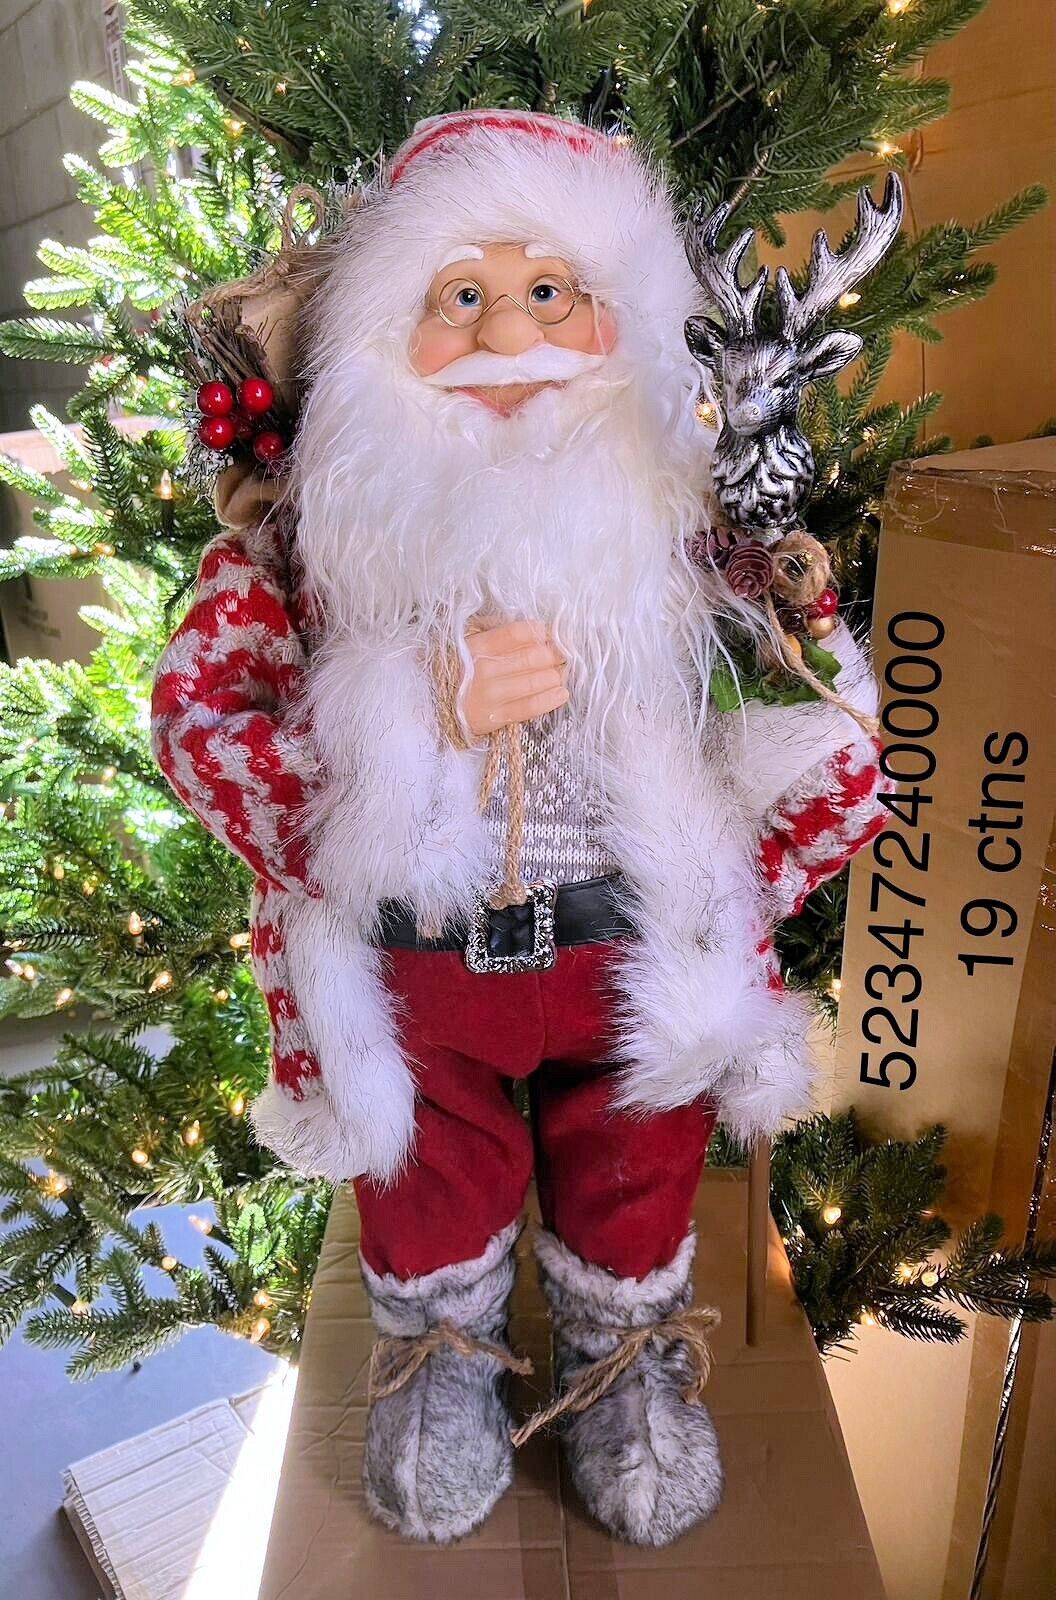 24IN STANDING SANTA FIGURINE RED WHITE COAT WINTER HOLIDAY CHRISTMAS DECOR